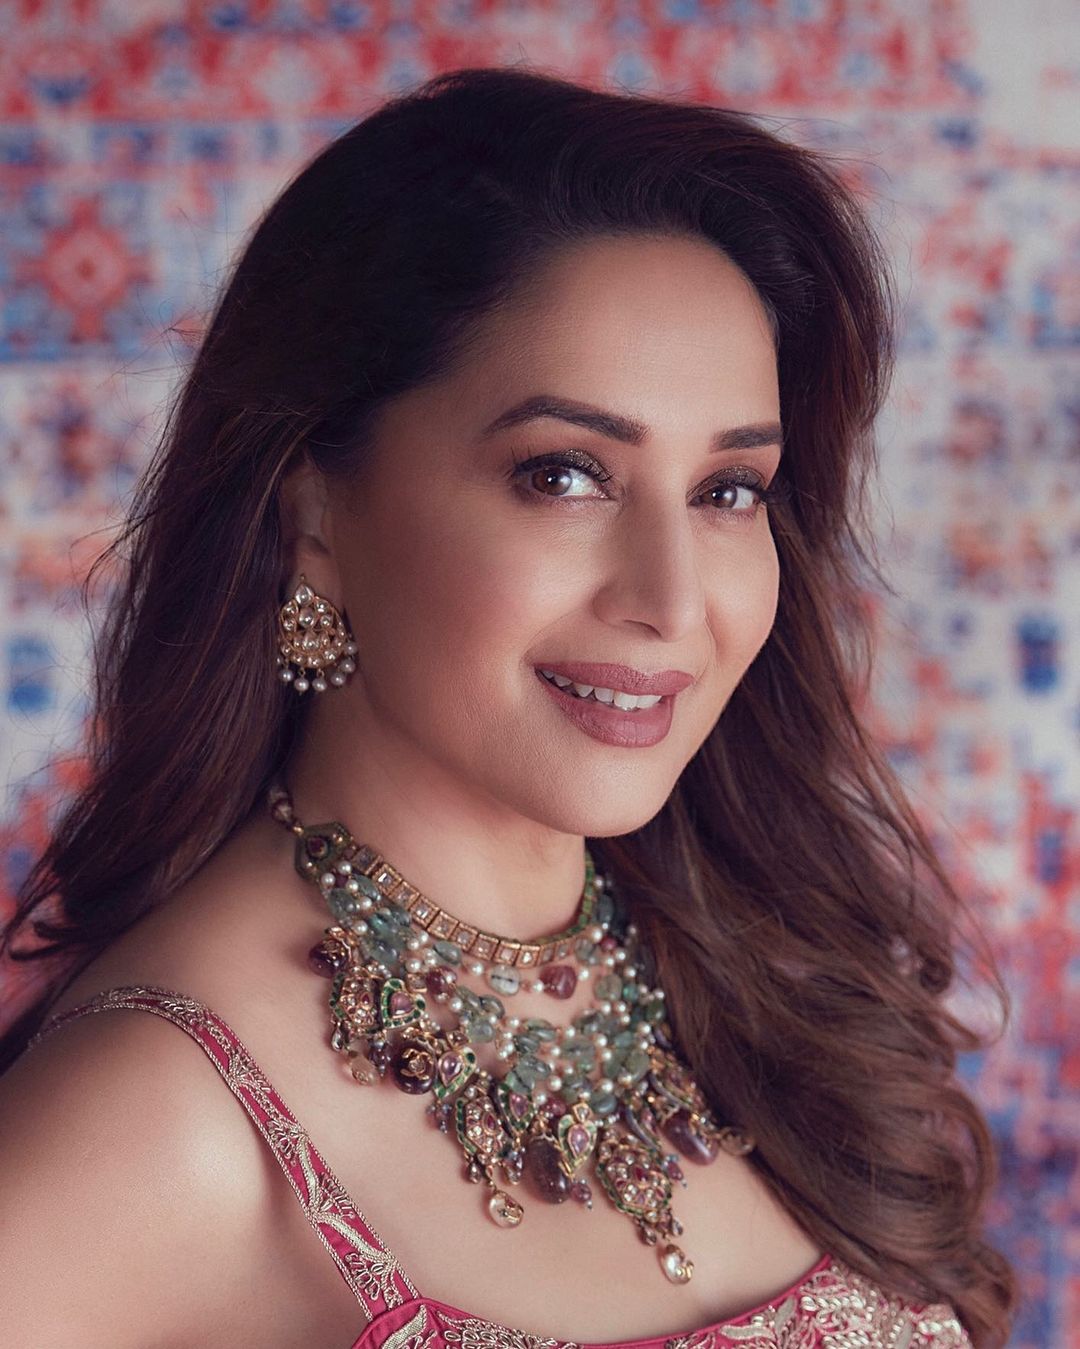 Madhuri Dixit (Indian Actress) - Age, Height, Net Worth, Biography